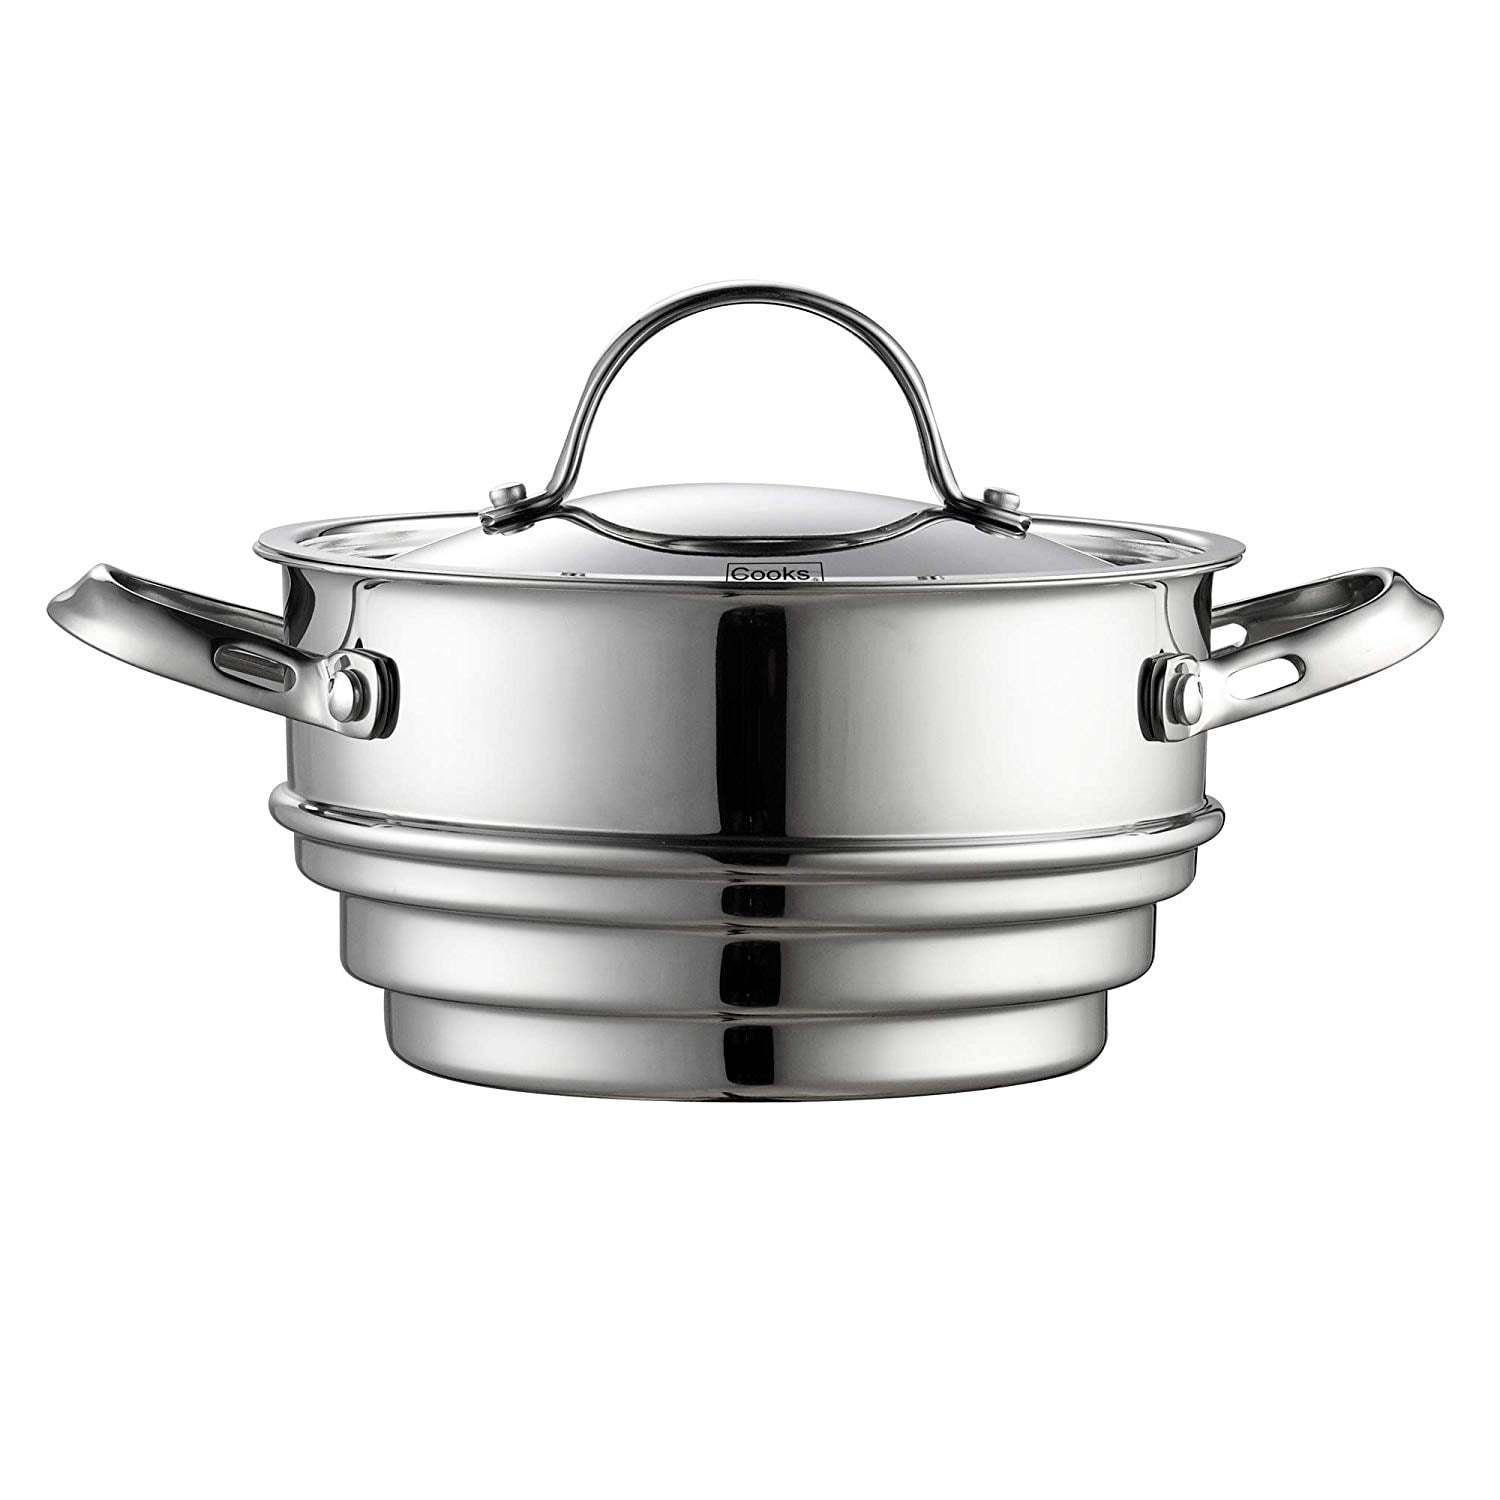 Cooks Standard 02631 Classic 10-Piece Stainless Steel Cookware Set, Silver - 3